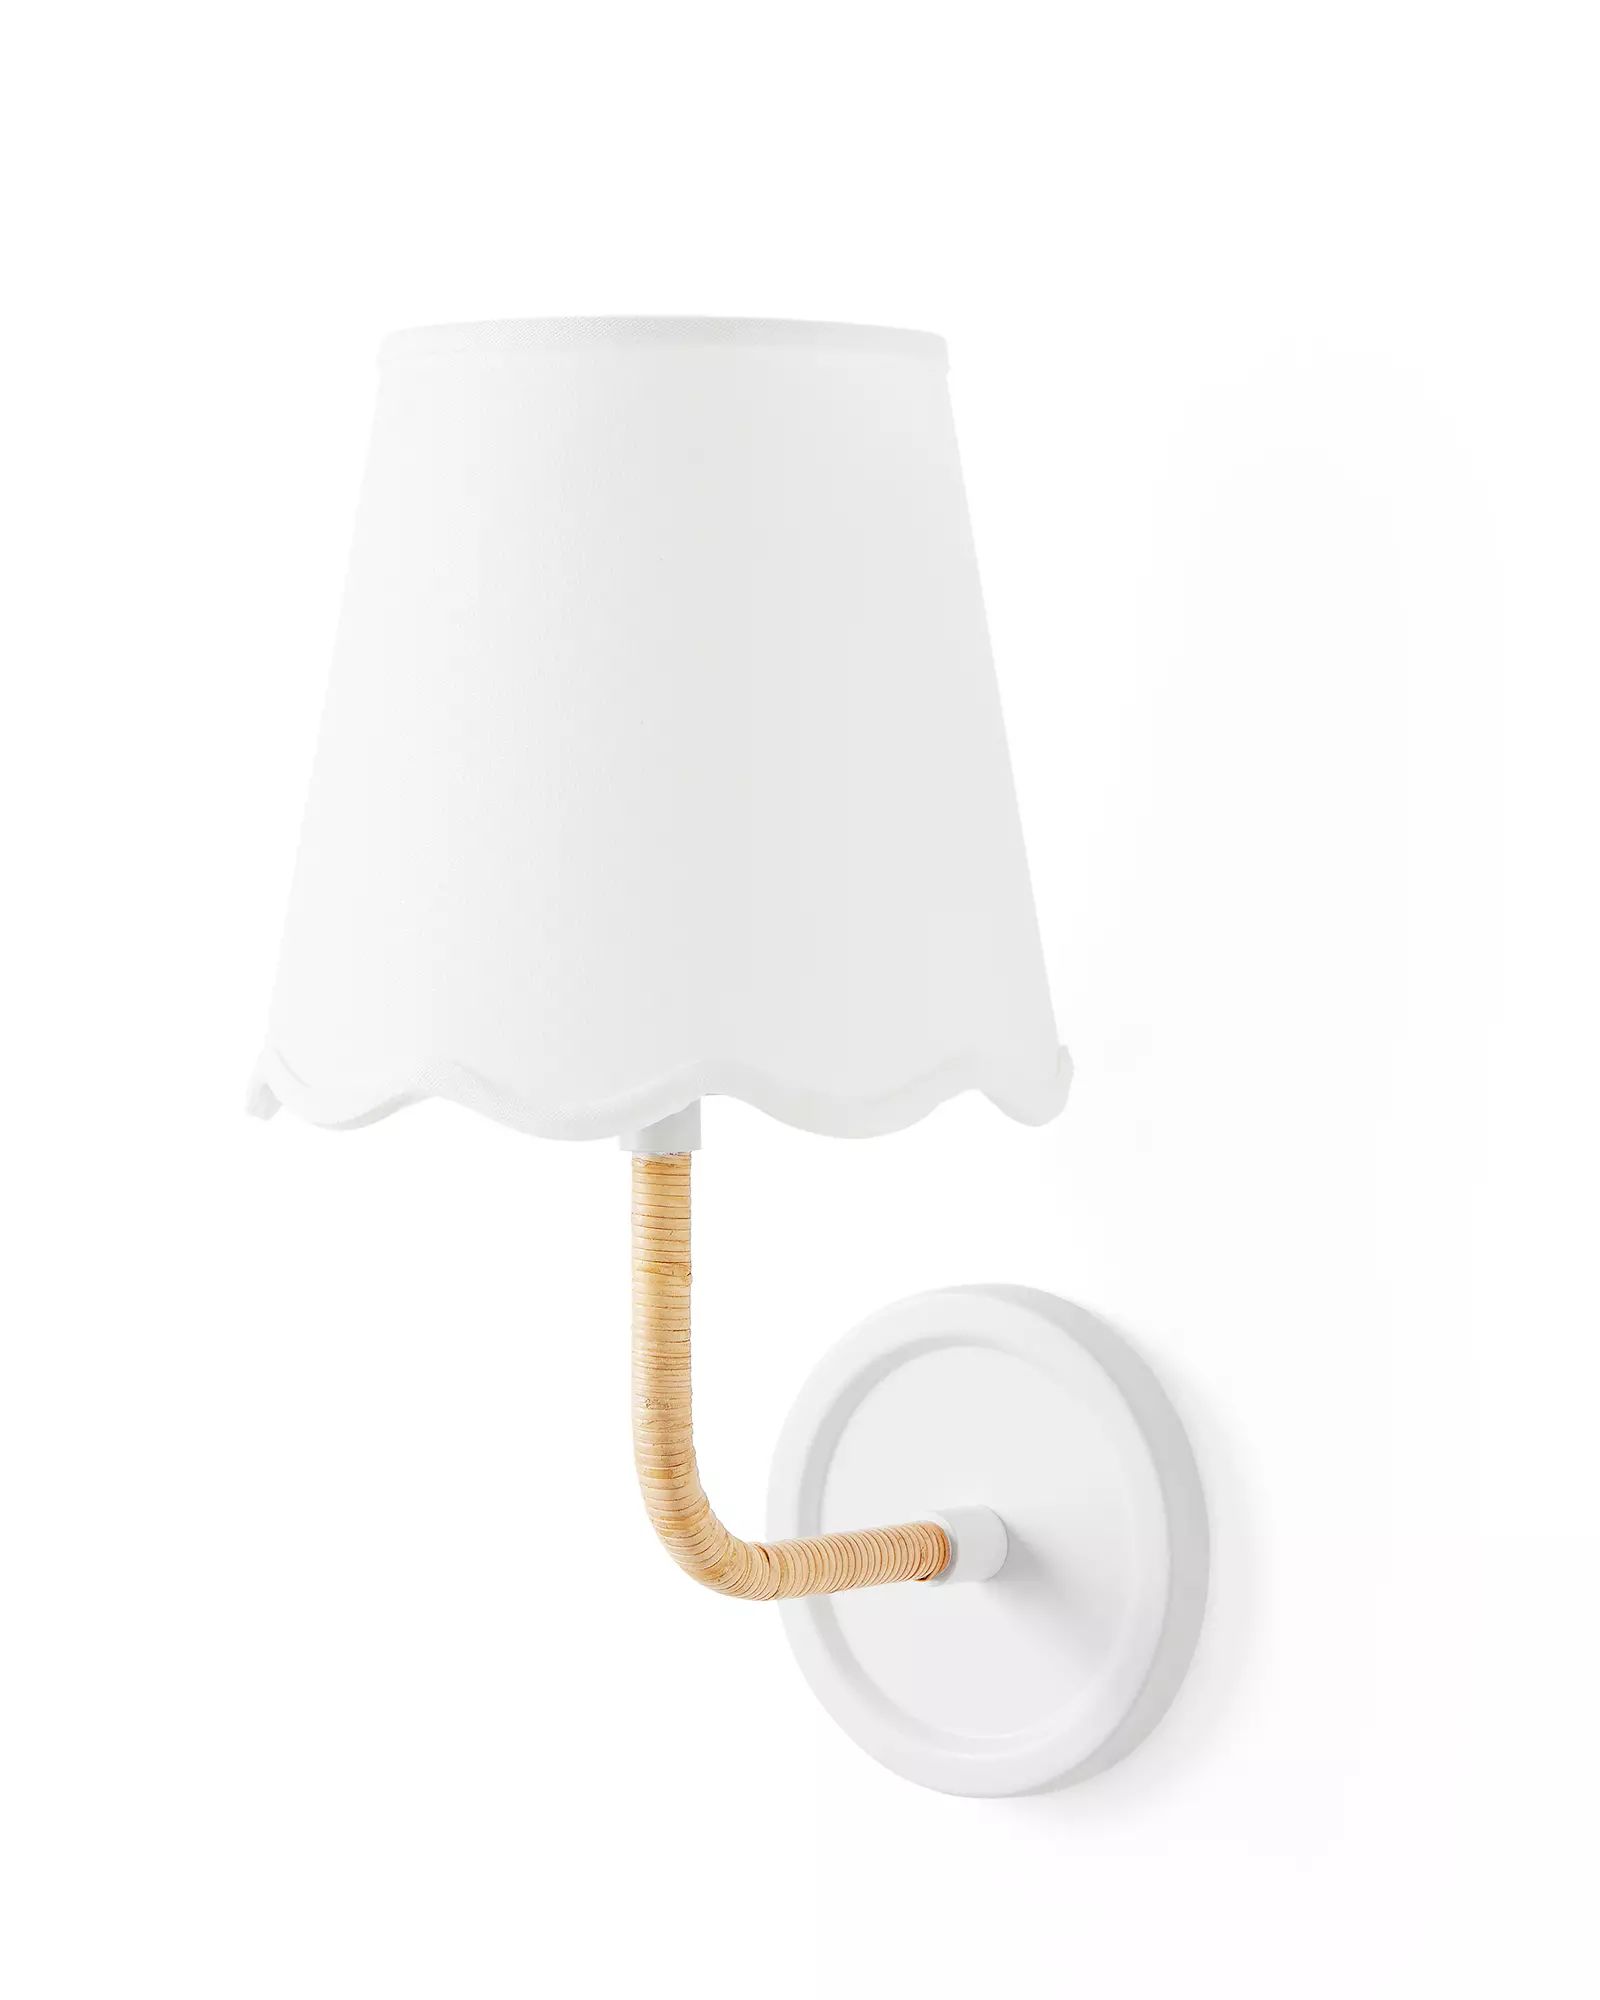 Larkspur Single Sconce | Serena and Lily